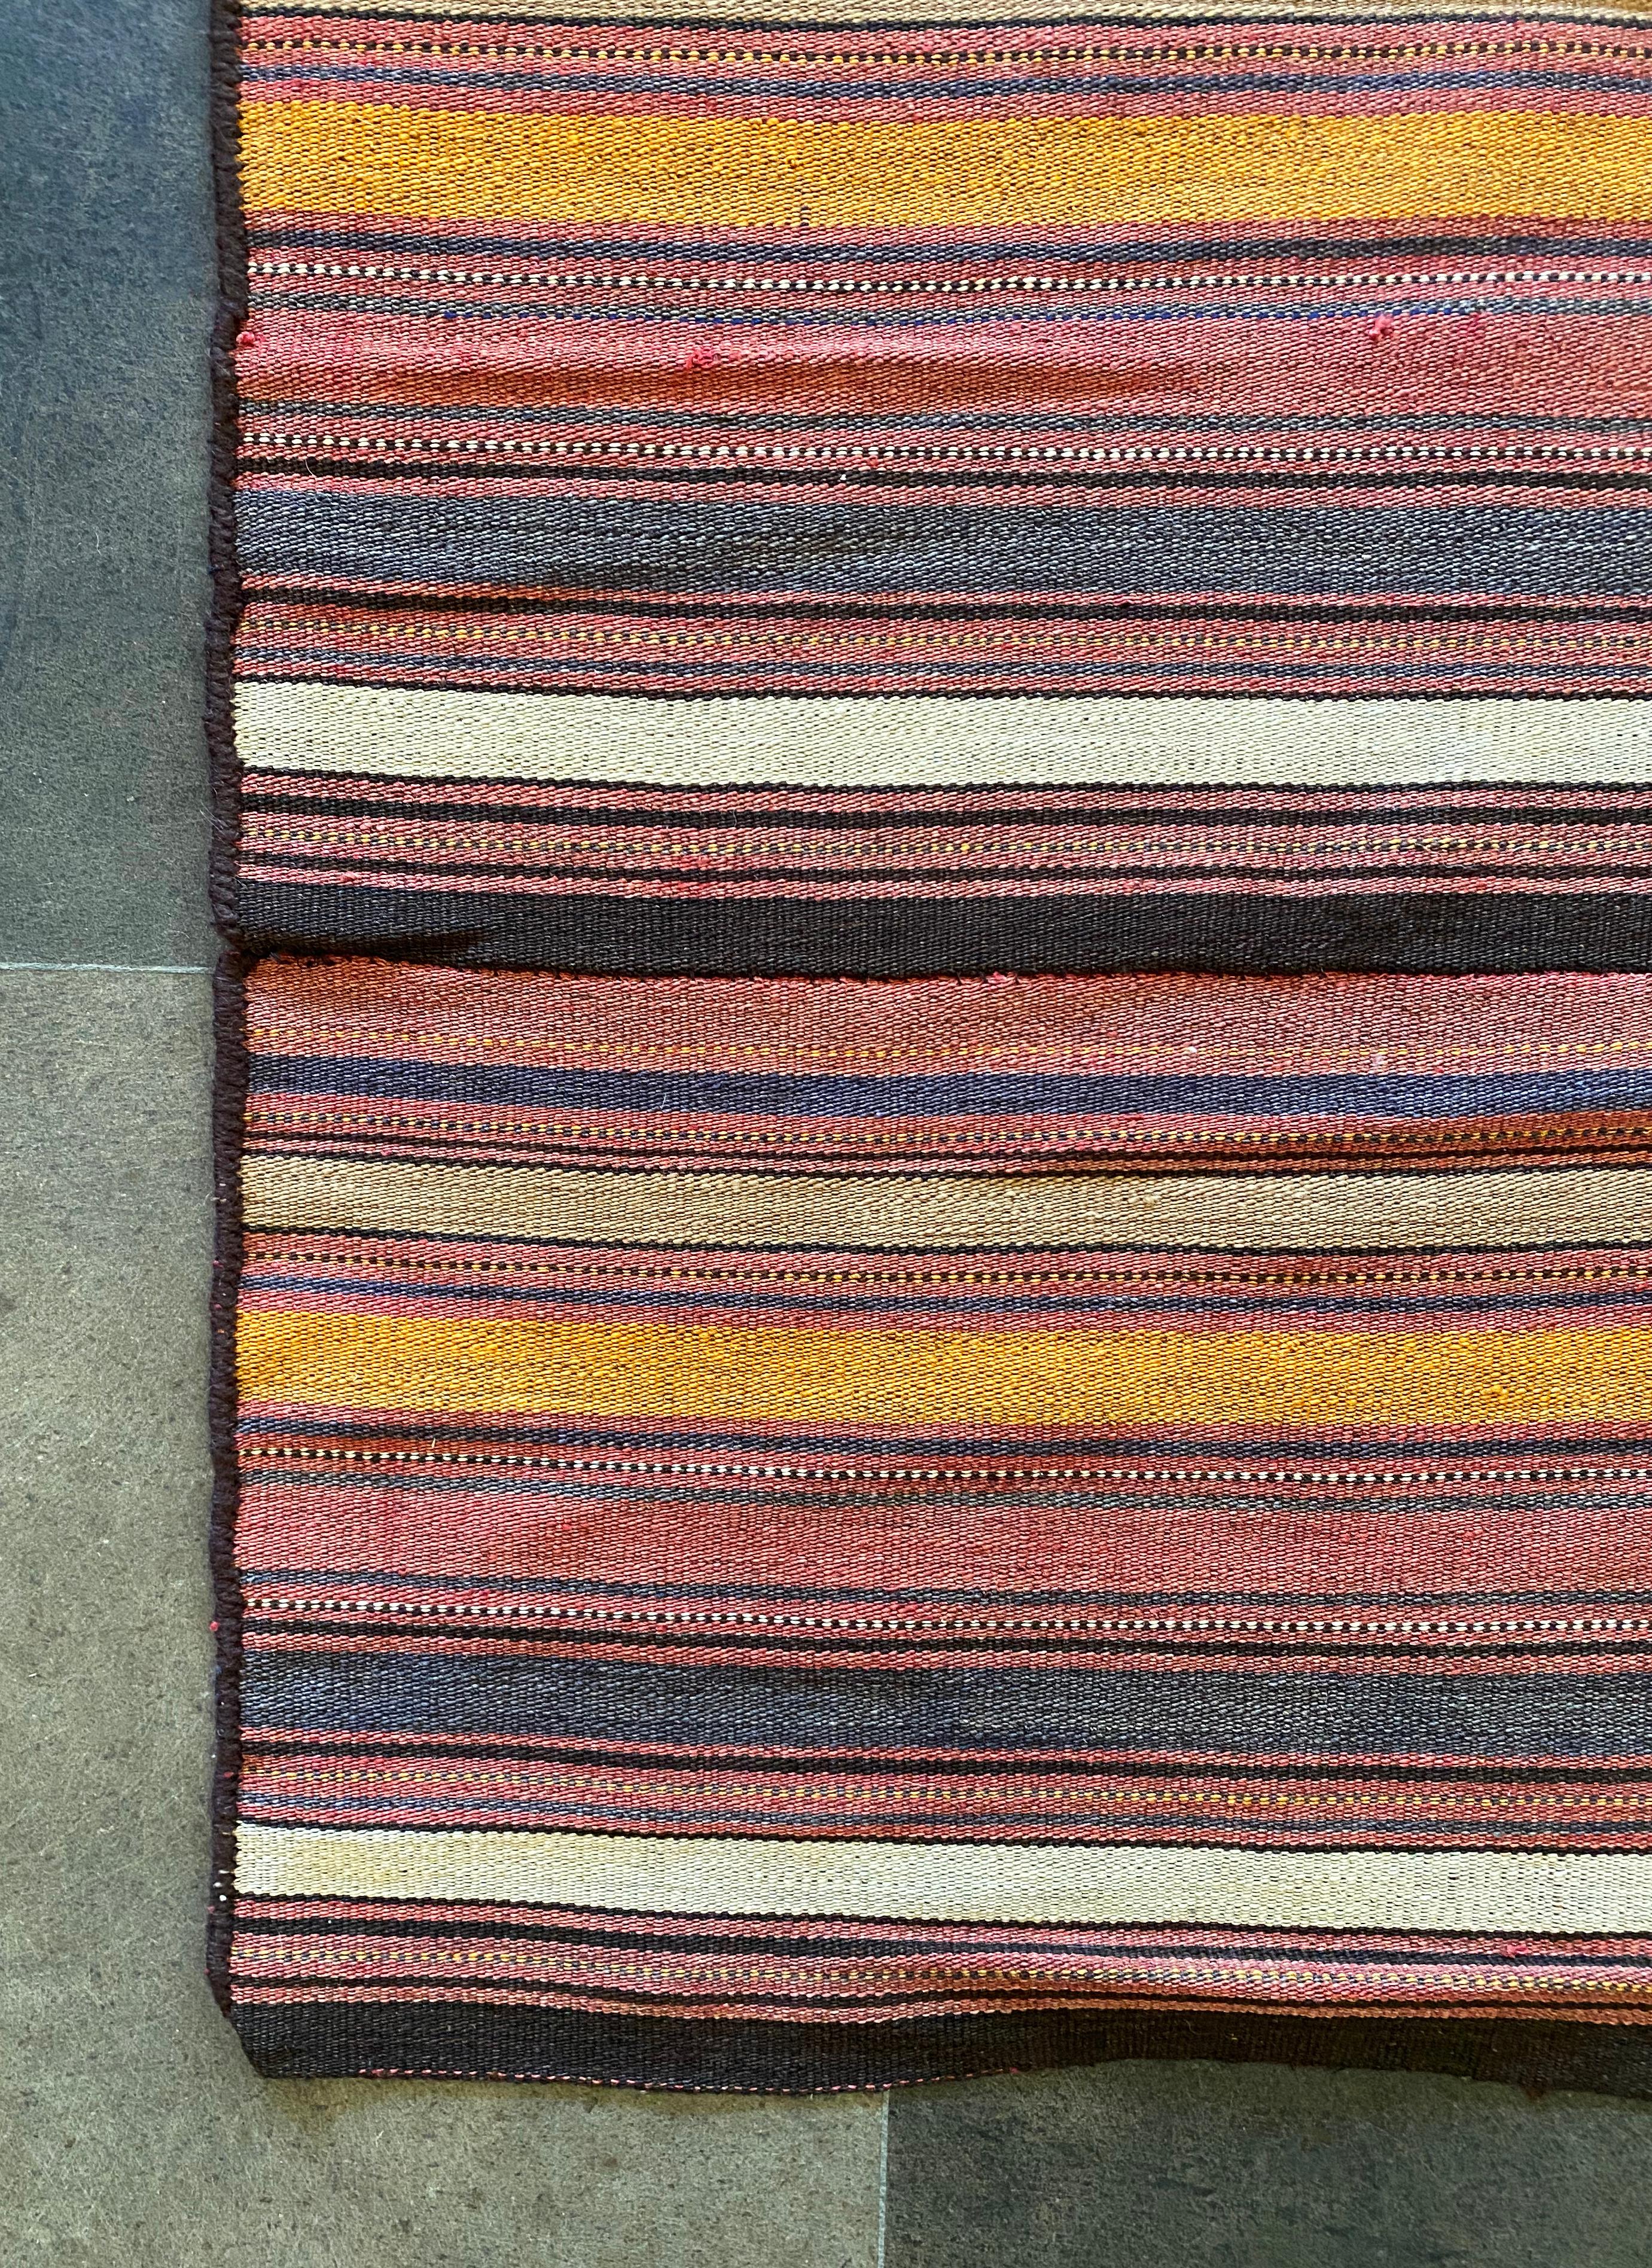 This Turkish Klim rug features a stunning mix of naturally dyed wool stripes in orange, red, black & cream pigment. It originates from the early 20th century. There is some age related fading to the original colour. 

Dimensions: Length 247cm x